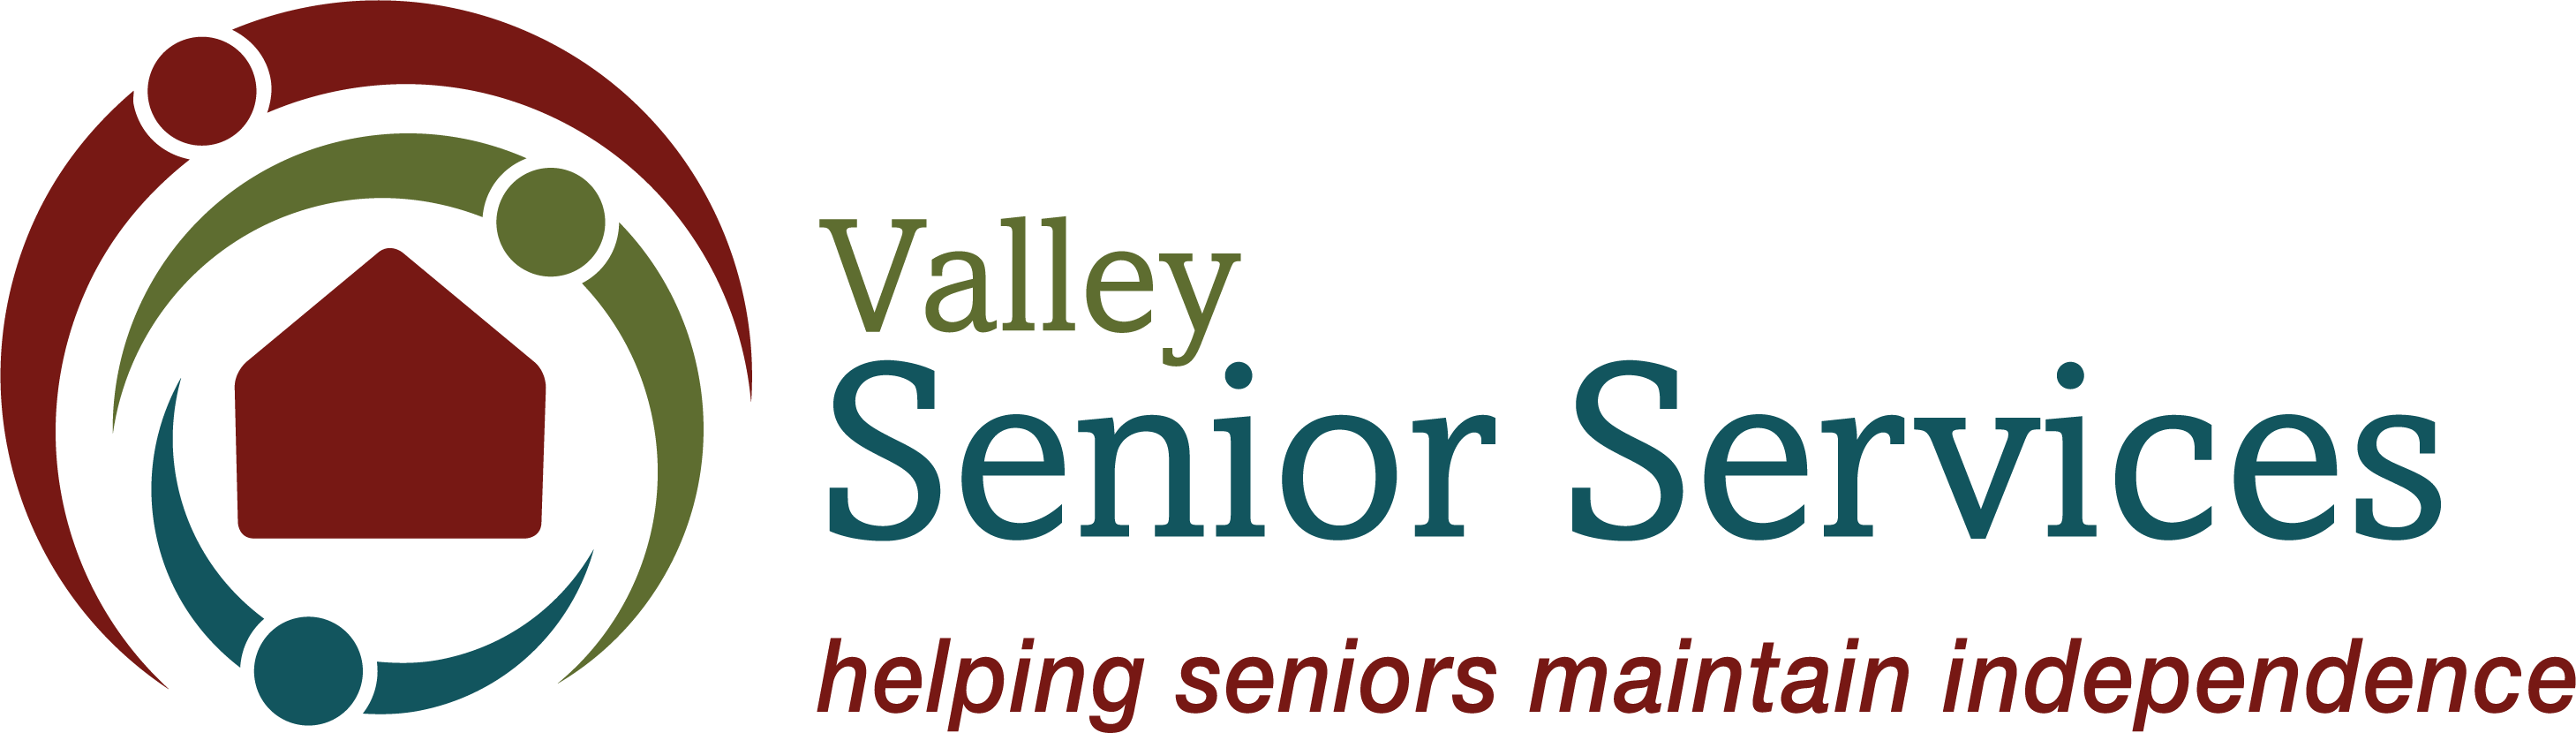 Valley Senior Services Logo with House surrounded by 3 semi circles in maroon, olive green and dark teal with wording helping seniors maintain independence under